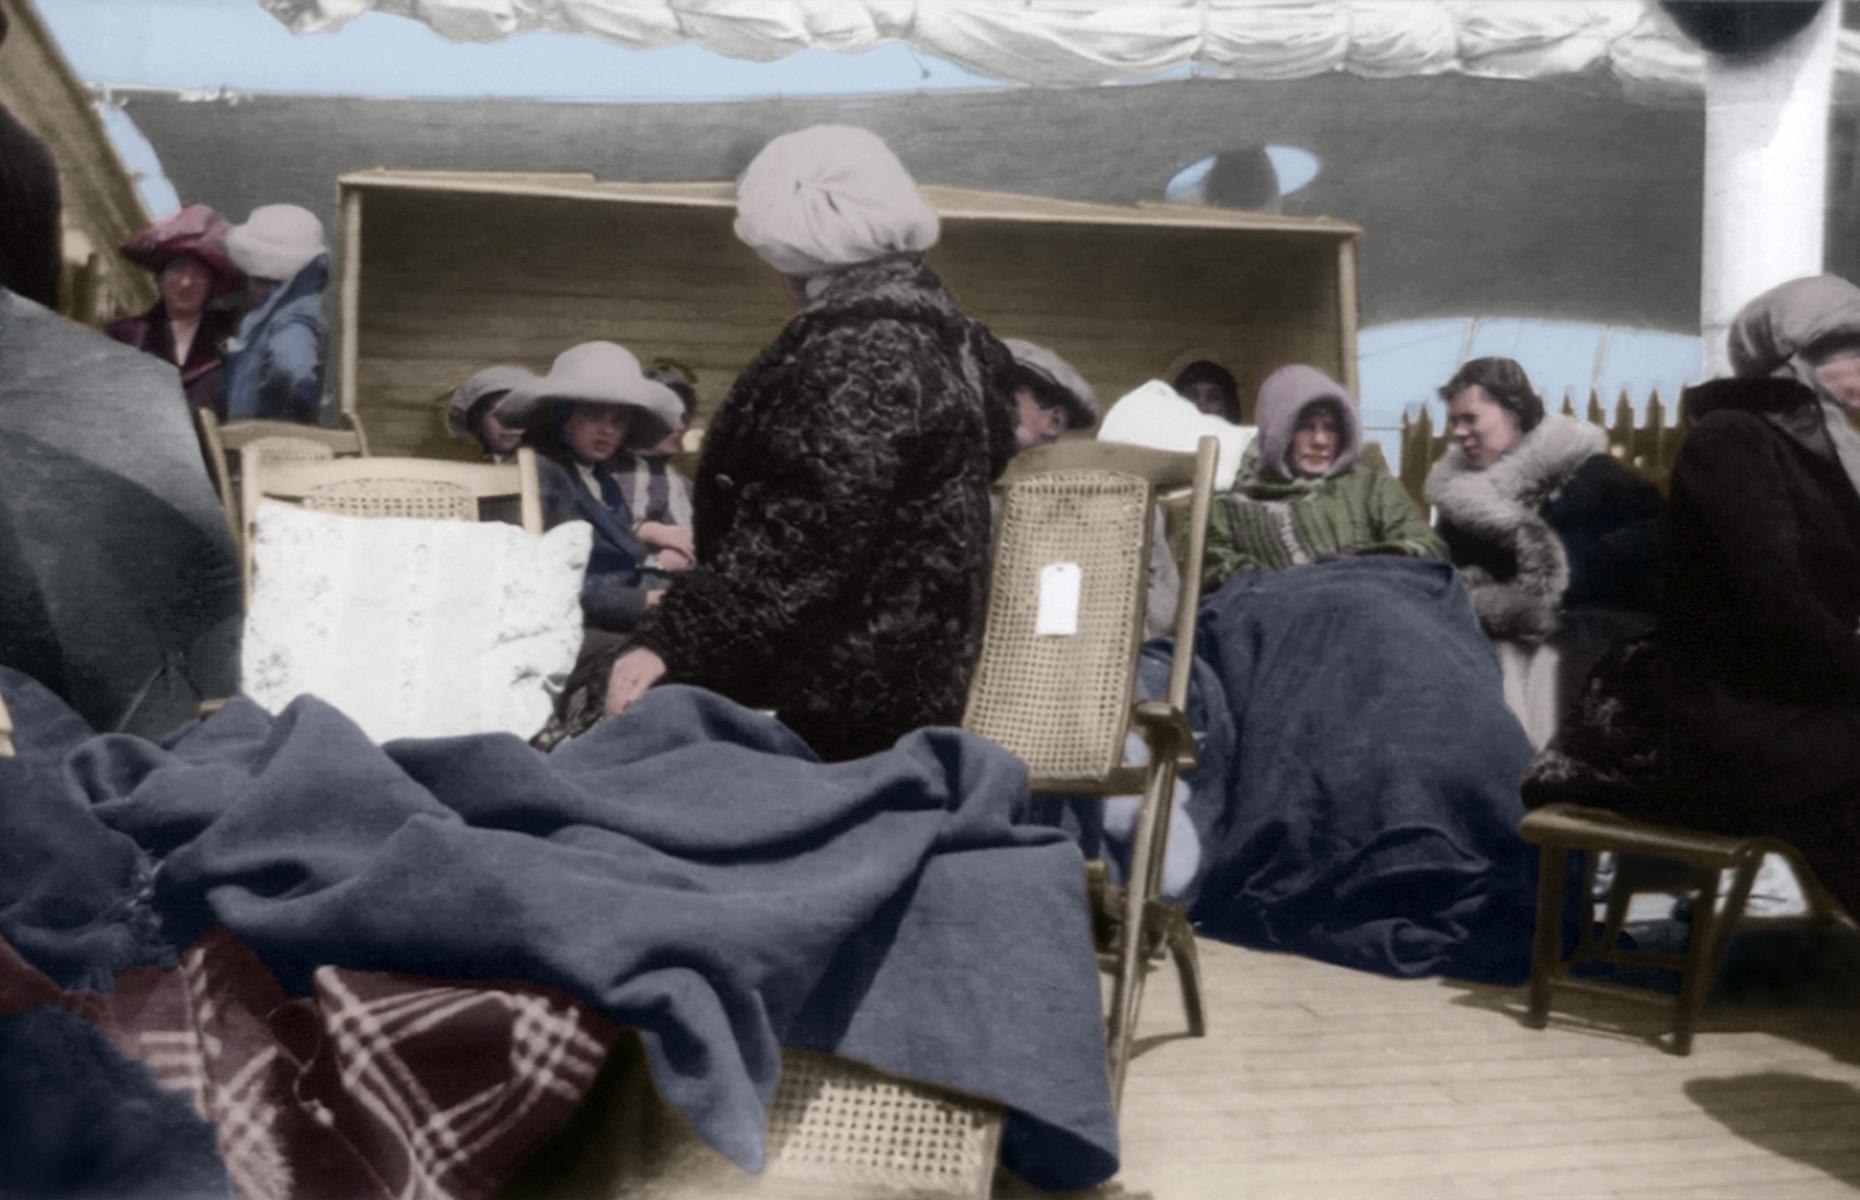 <p>The Carpathia didn't have enough resources with the extra passengers onboard – the crew picked up over 700 survivors – to continue on to Europe so she headed back to New York with the survivors. Bernice also took pictures of survivors wearing borrowed clothing as many had escaped the Titanic wearing just their night wear. A news reporter discovered Bernice’s pictures and bought them for just $10. Bernice later donated her camera and all her pictures to the National Museum of American History.</p>